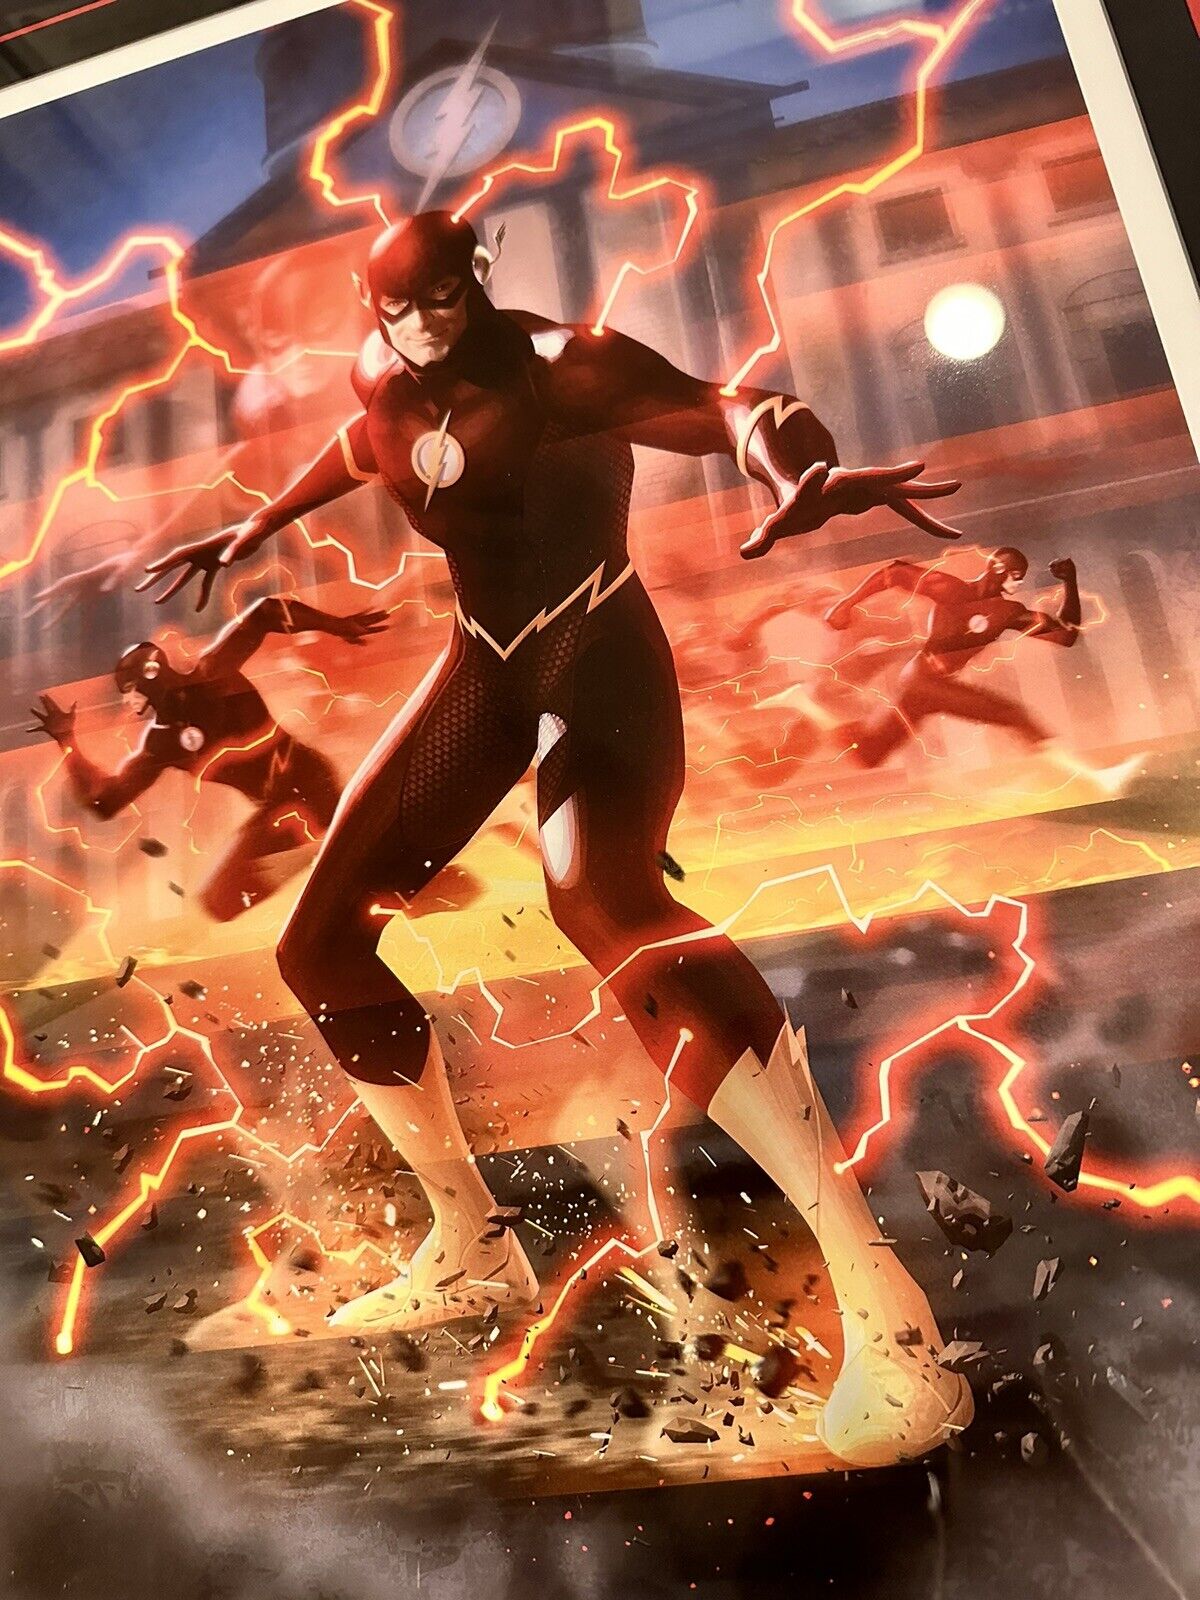 The Flash Art Print By Sideshow And DC Comics